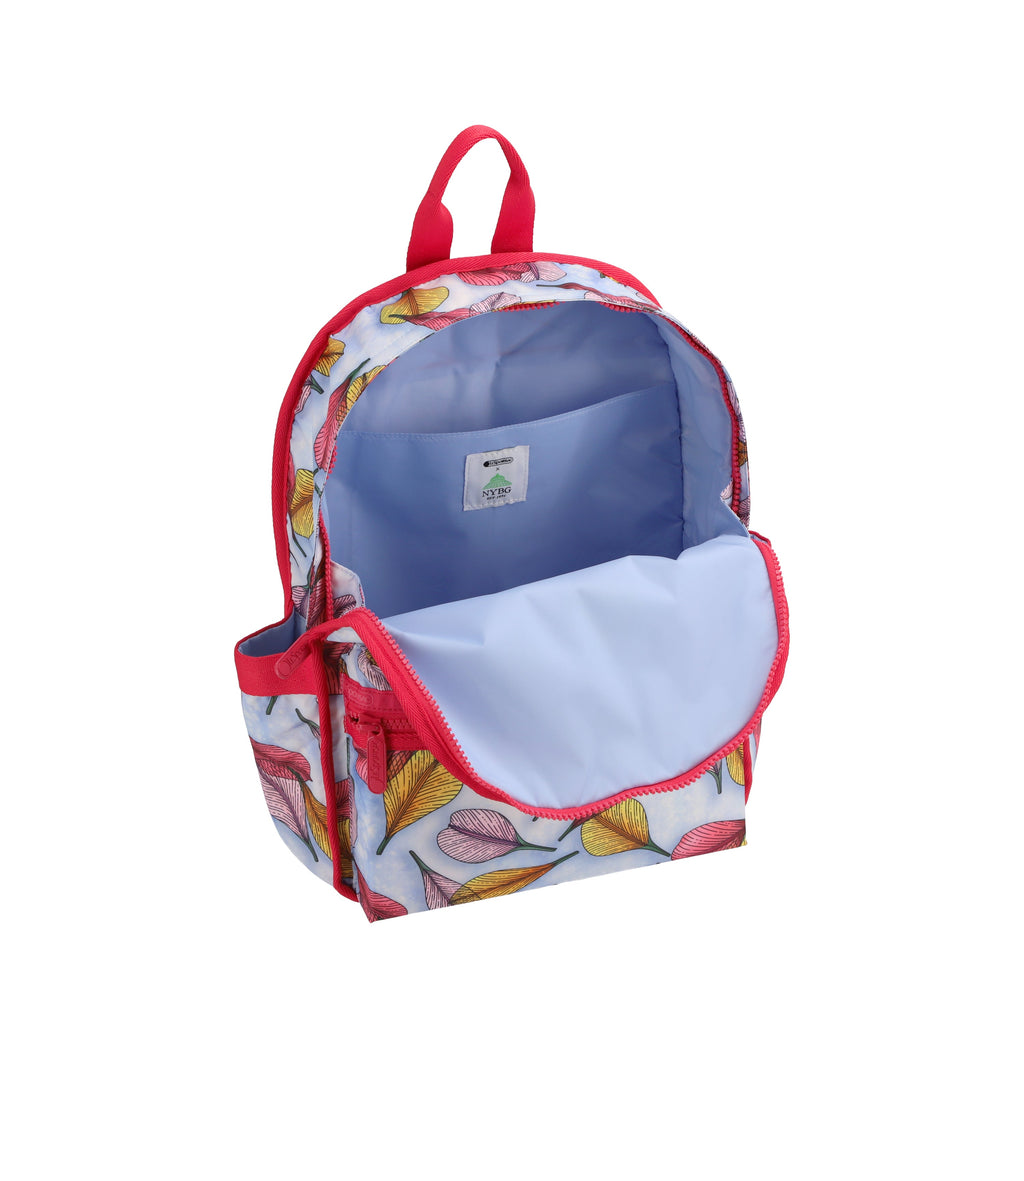 Route Small Backpack - 24253743464496